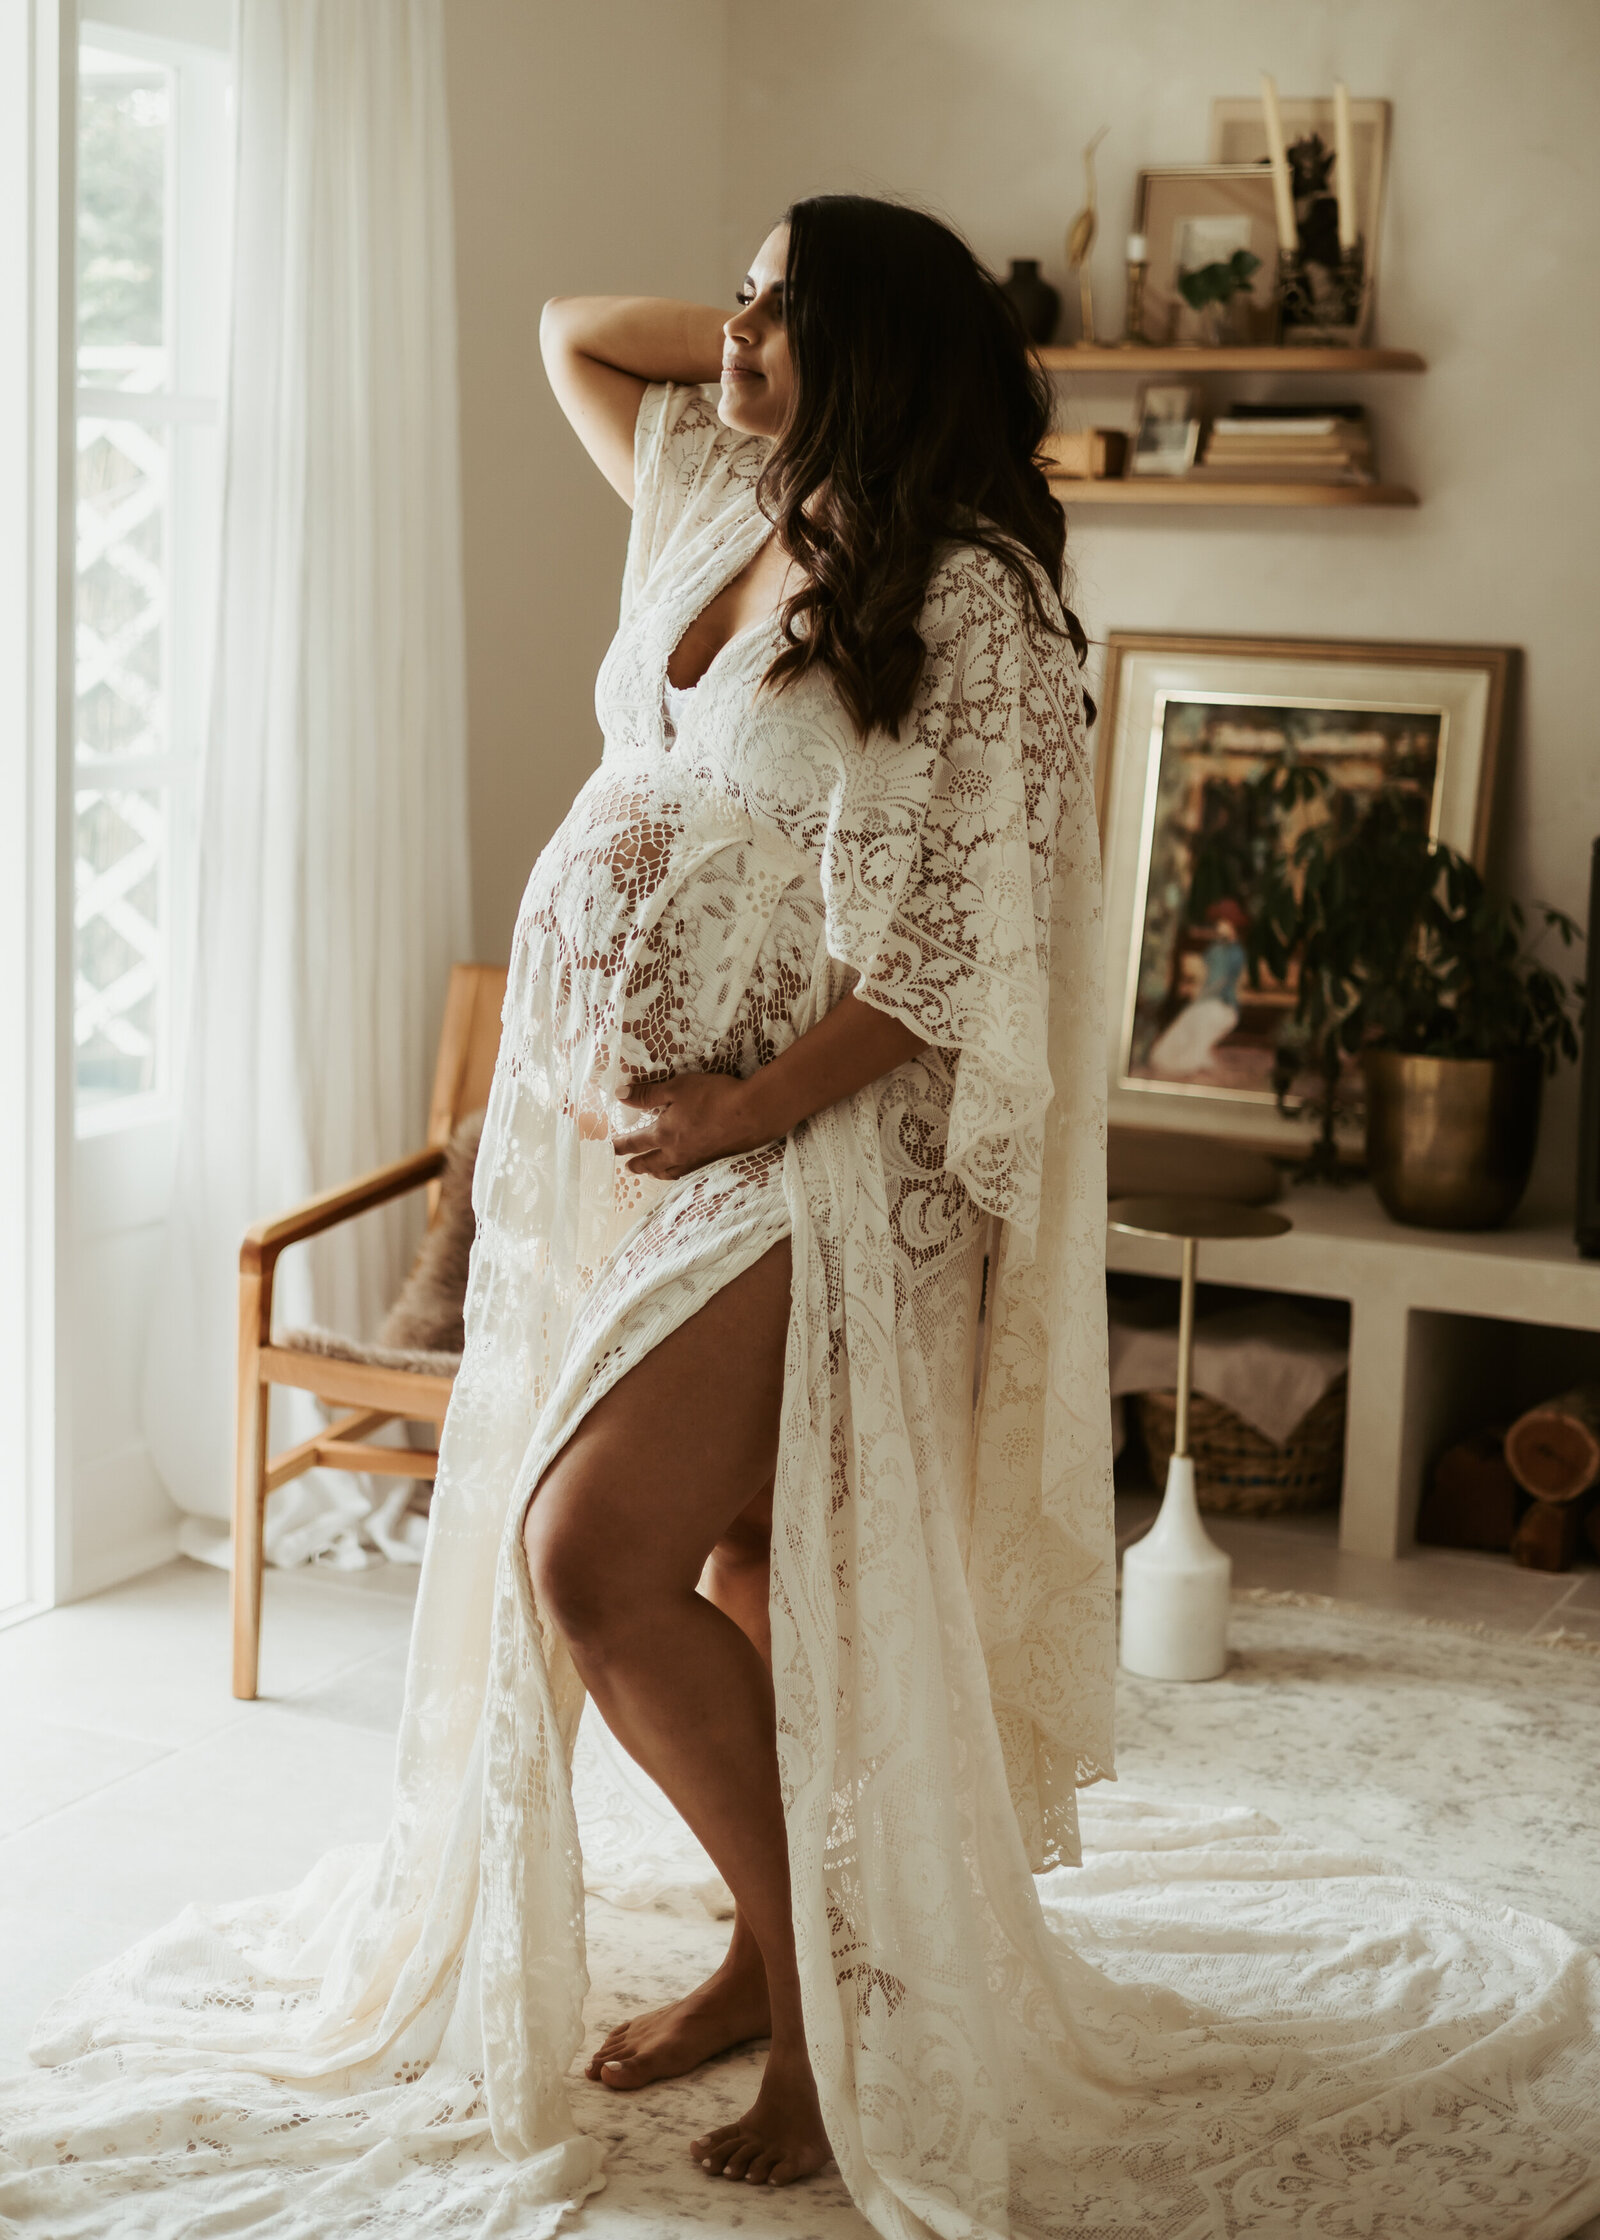 Sydney mum-to-be wearing a long lace dress that shows off her baby bump for her in-home maternity photoshoot